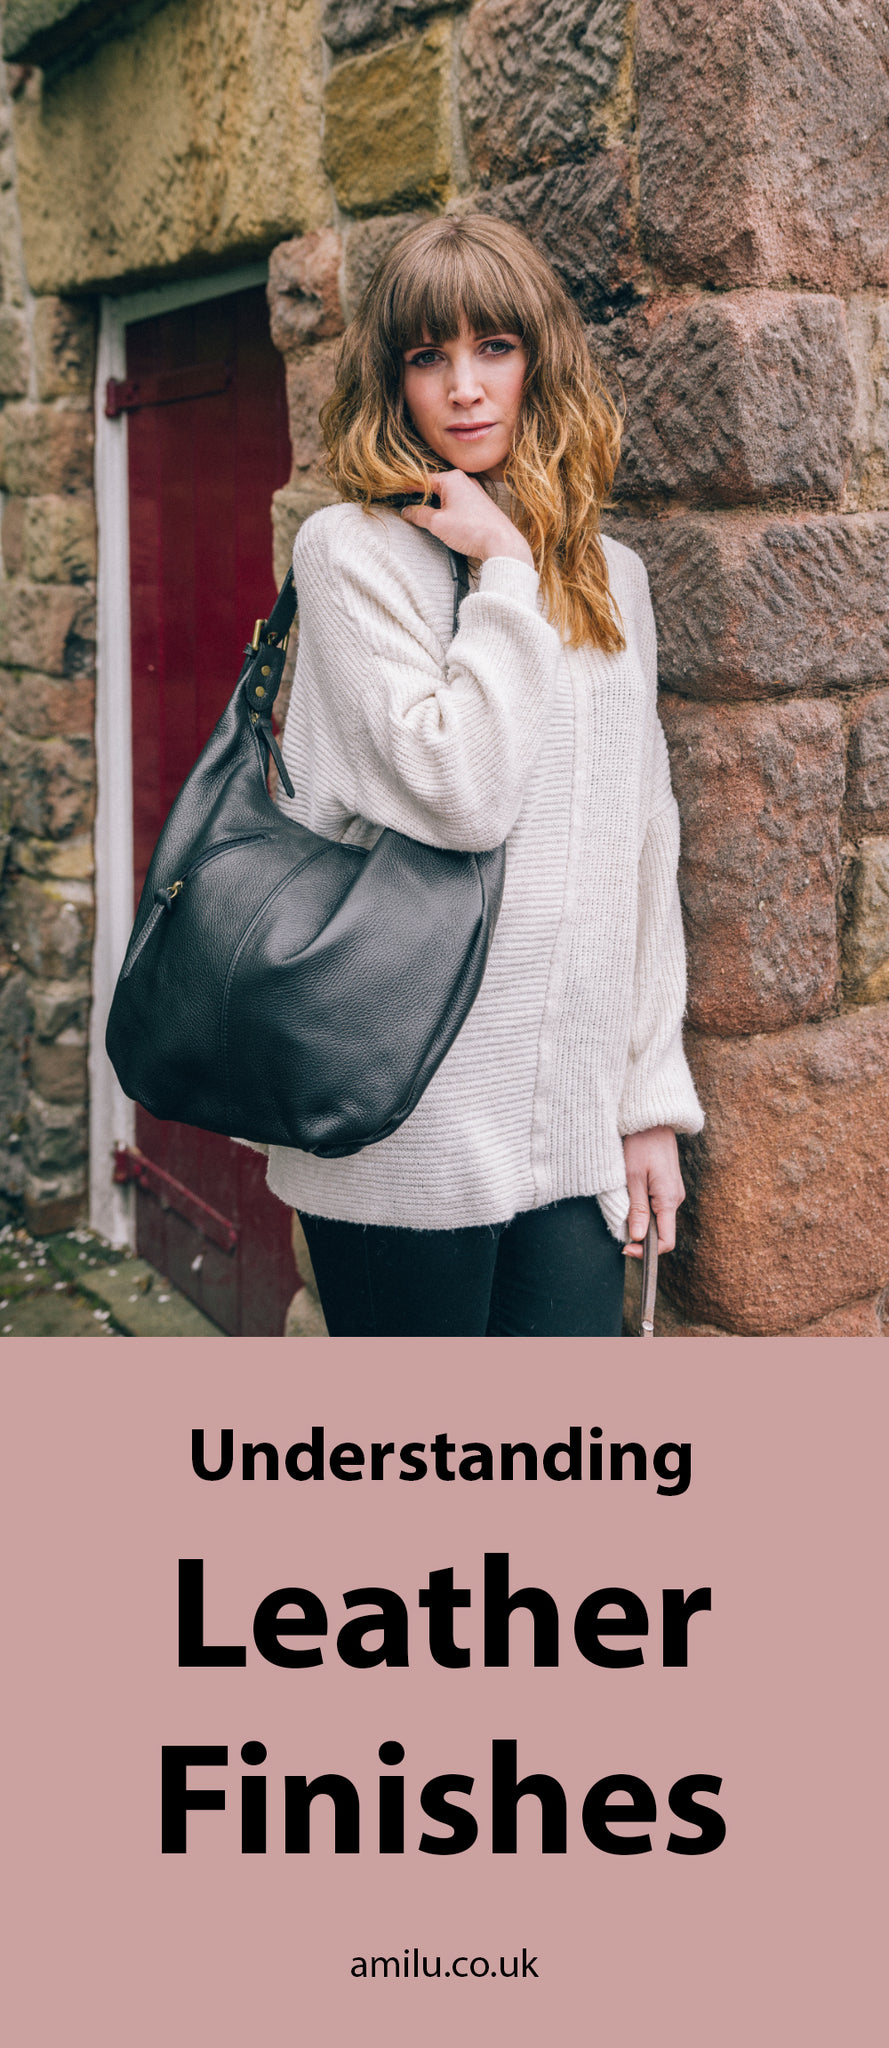 Understanding Leather Finishes - Blog Post by Amilu Handbags